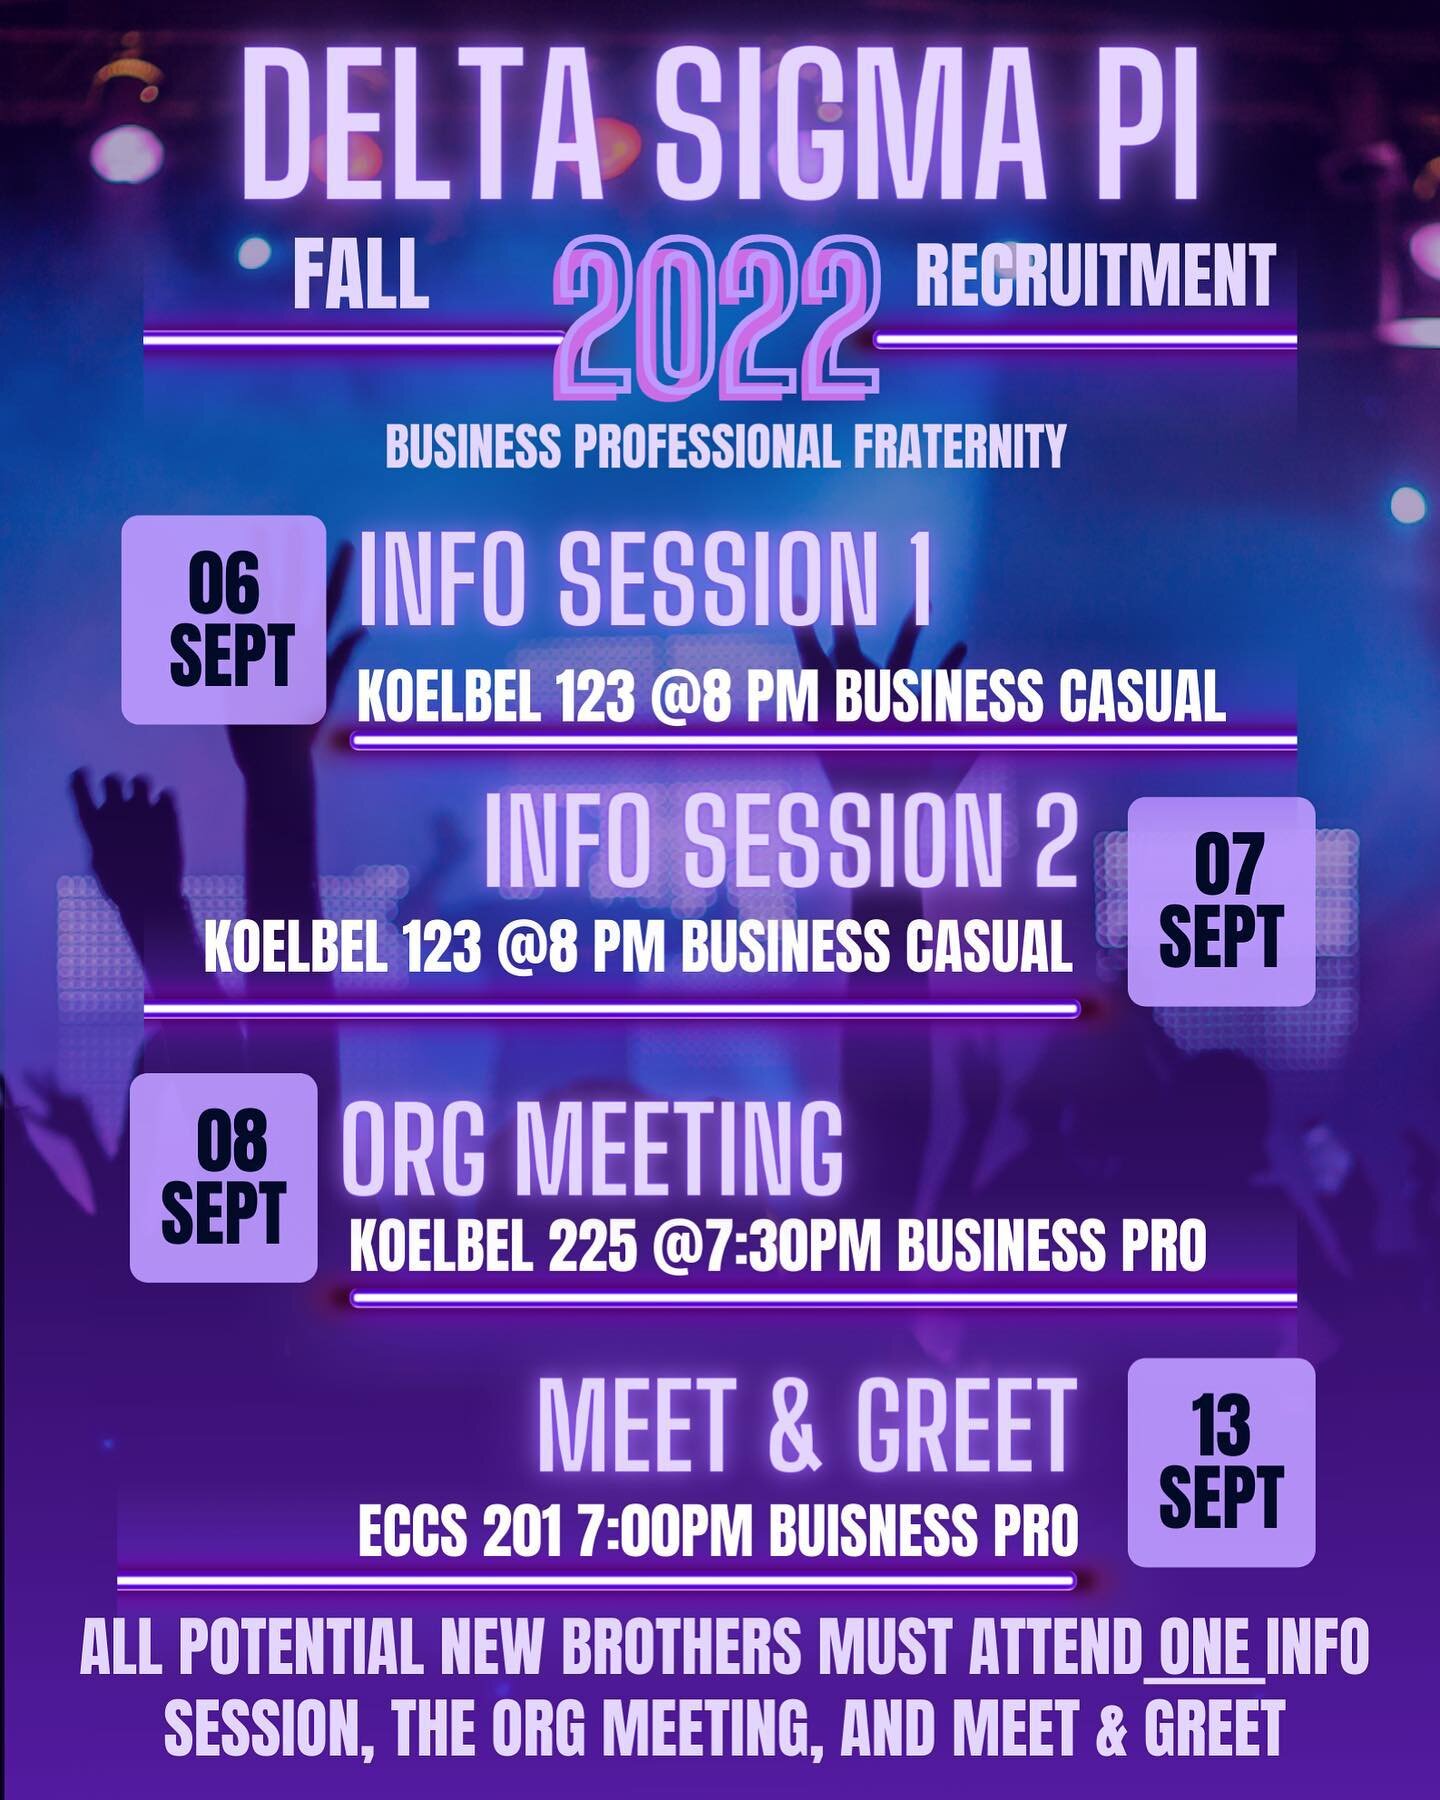 ONE WEEK until recruitment! DM @deltasigmapiboulder or email our SVP Shrey Seth shse2940@colorado.edu with any questions or concerns. We&rsquo;re ecstatic to meet all potential new brothers so soon! (Please refer to the dates and times above from now